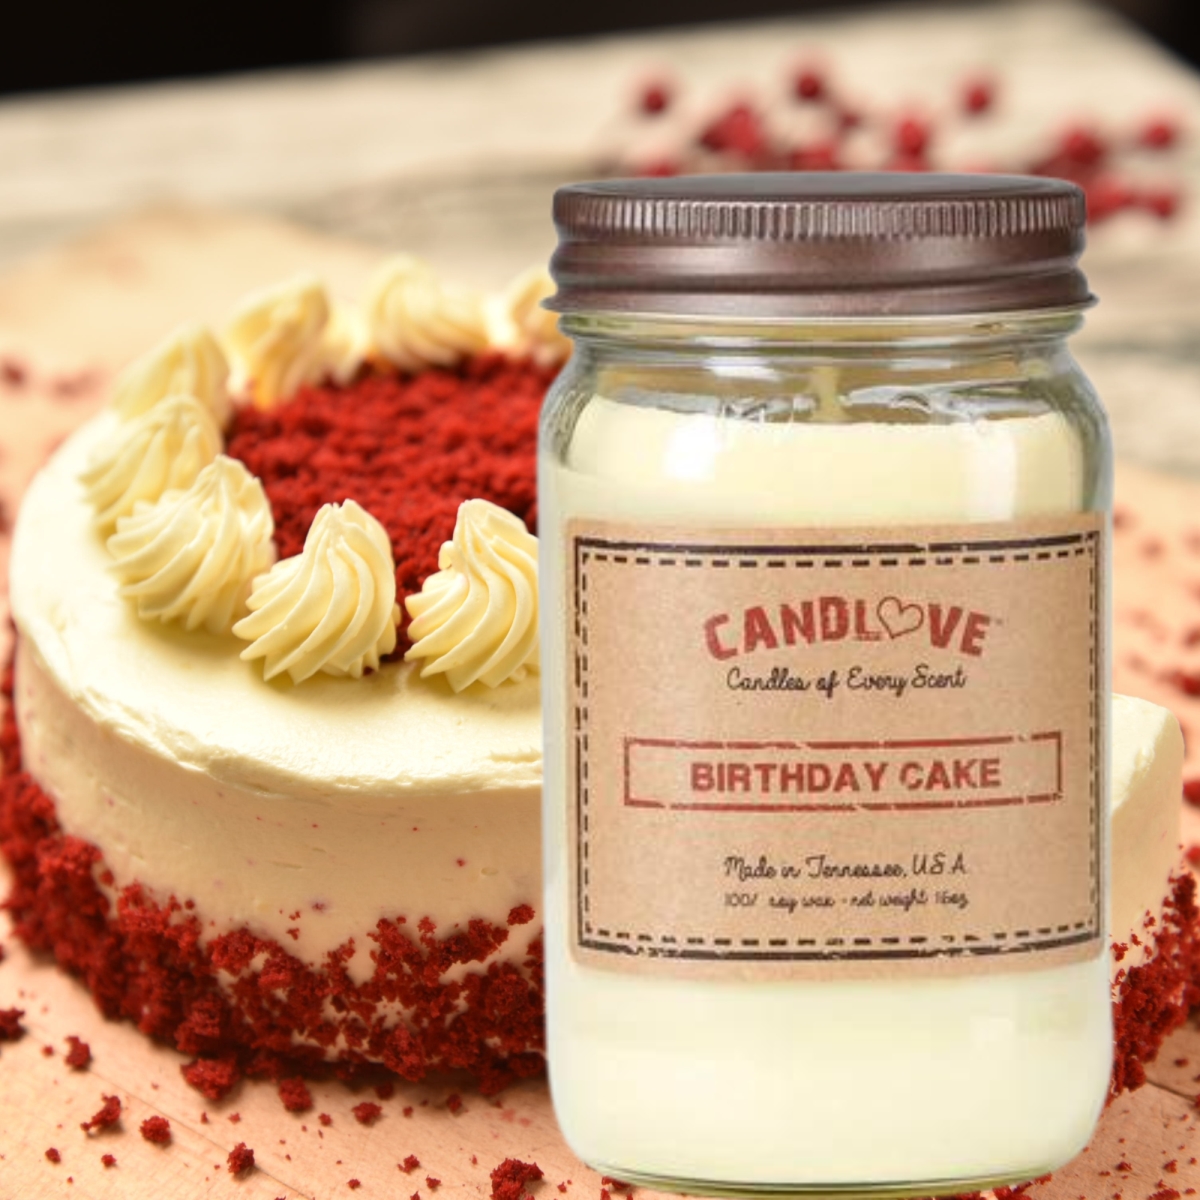 Picture of PPI SUPPLIES Birthday-C-C Candlove Birthday Cake Scented Candle - Non-Toxic 100% Soy Candle - Handmade & Hand Poured Long Burning Candle - Highly Scented All Natural Clean Burning Candle (16 OZ Mason Jar) Made in The USA